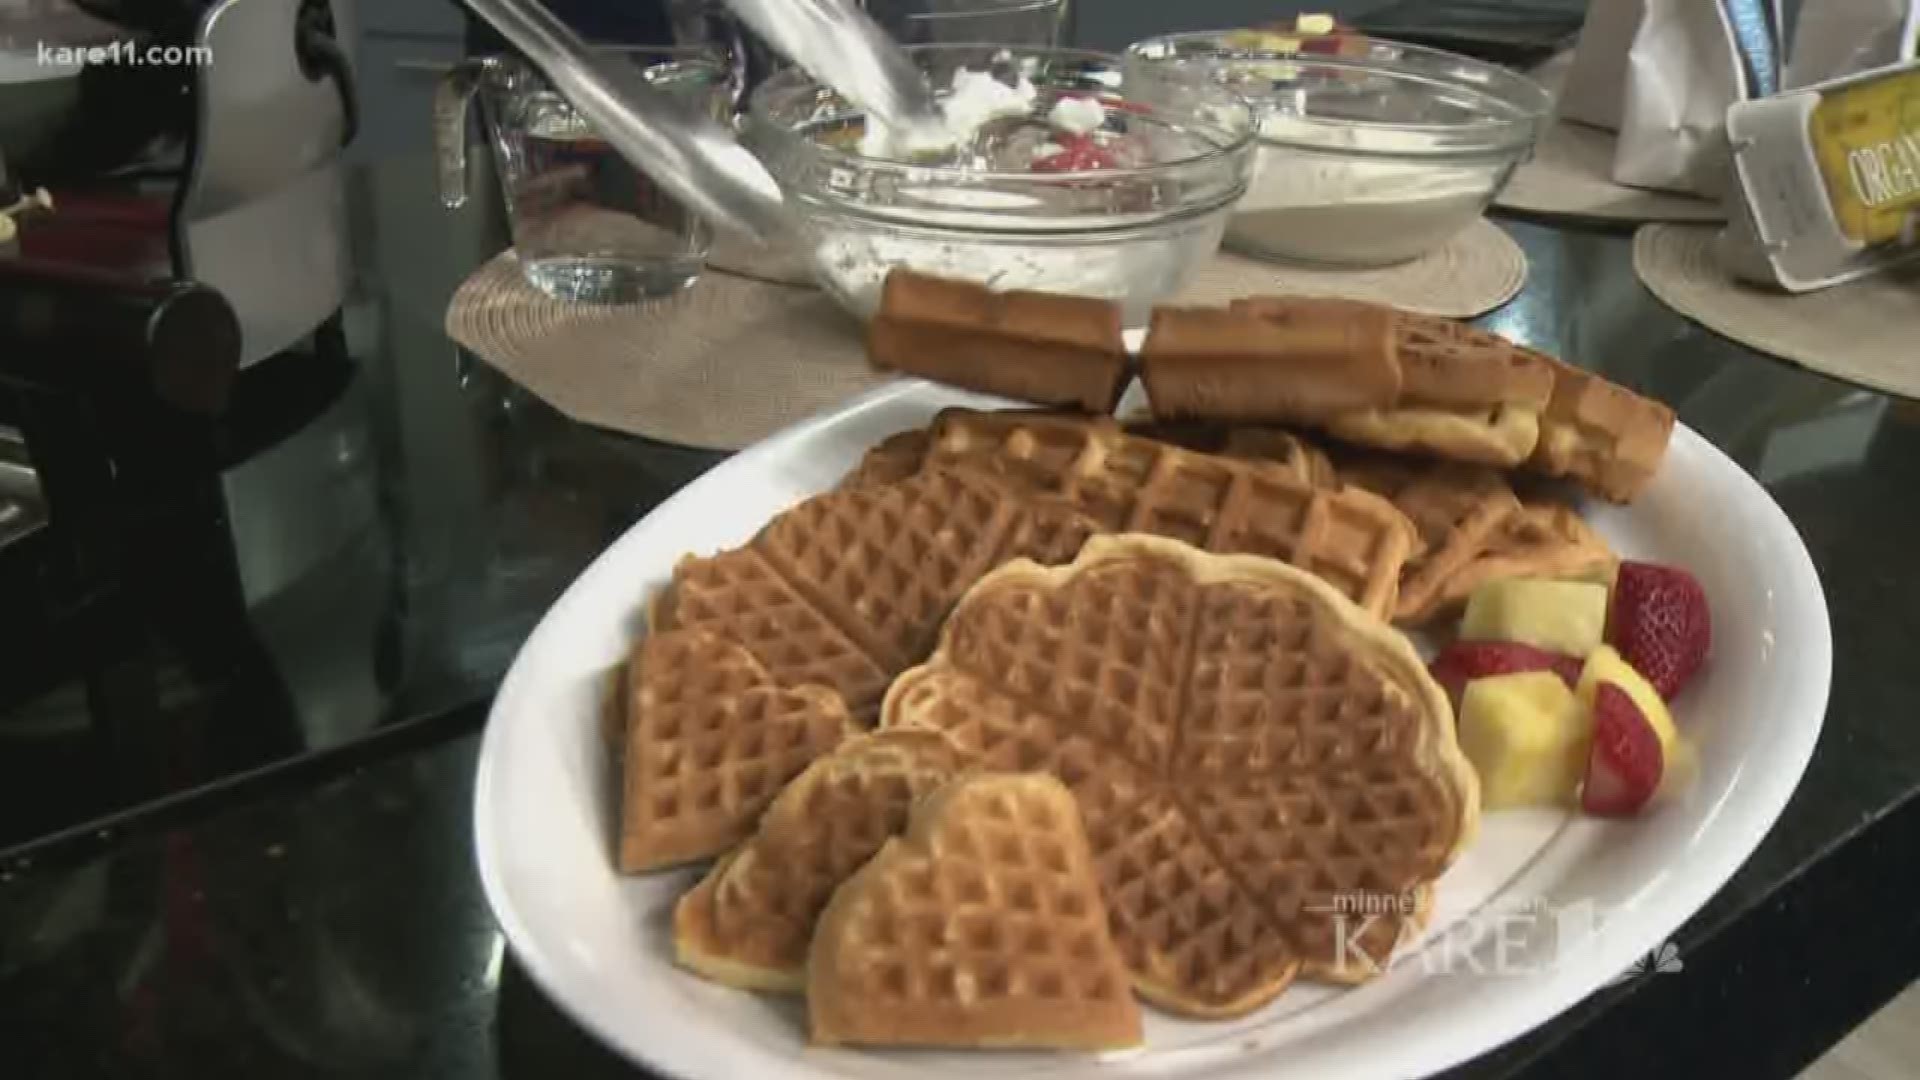 Rachel Perron from Kowalski's shows us how to make the perfect waffles. You can buy the waffle mix and the various flavors of maple syrup that you can buy at your local Kowalski's market,